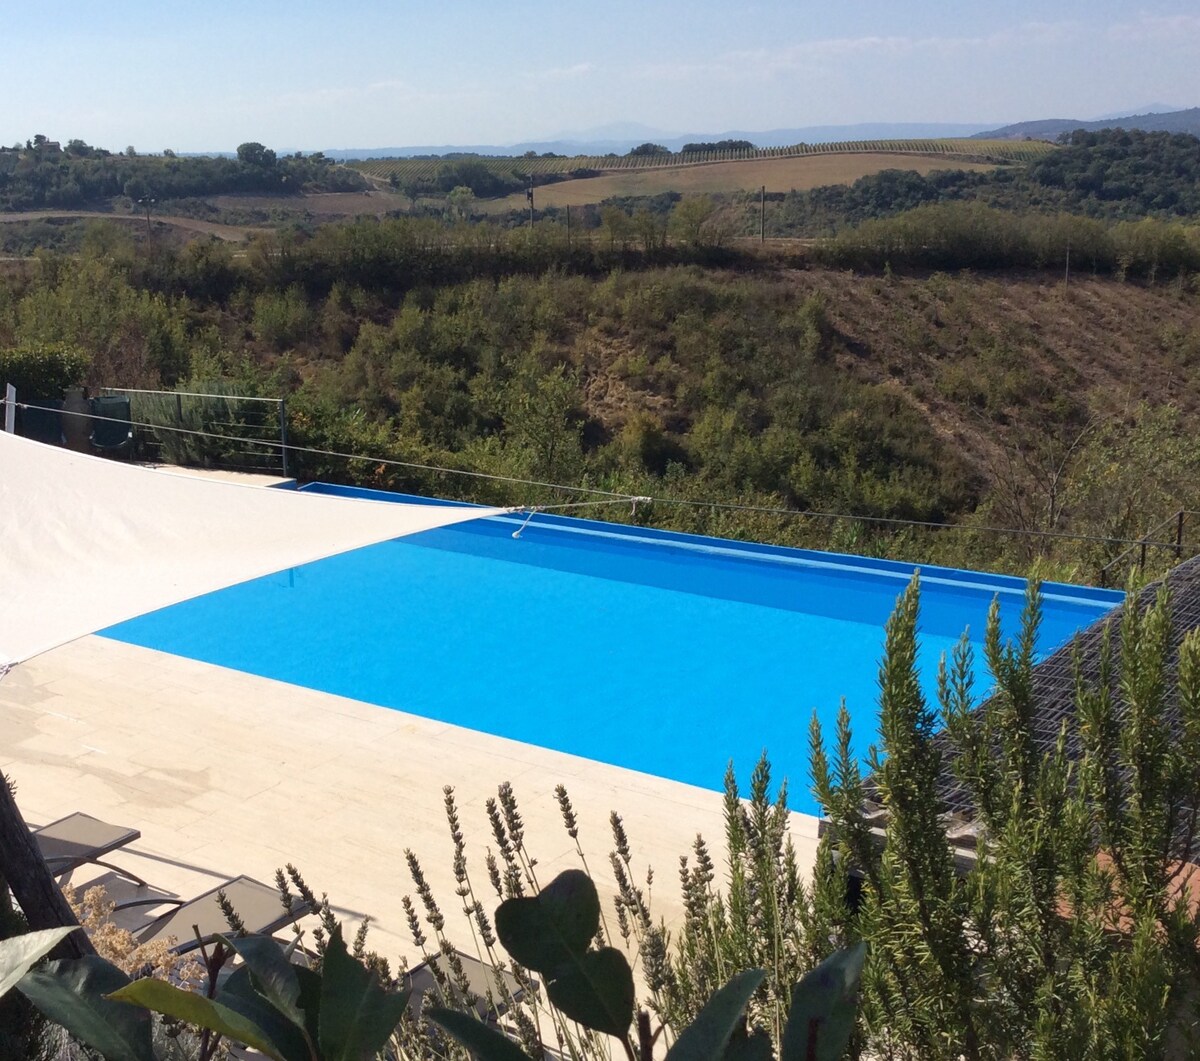 Villa with private infinity pool fantastic views